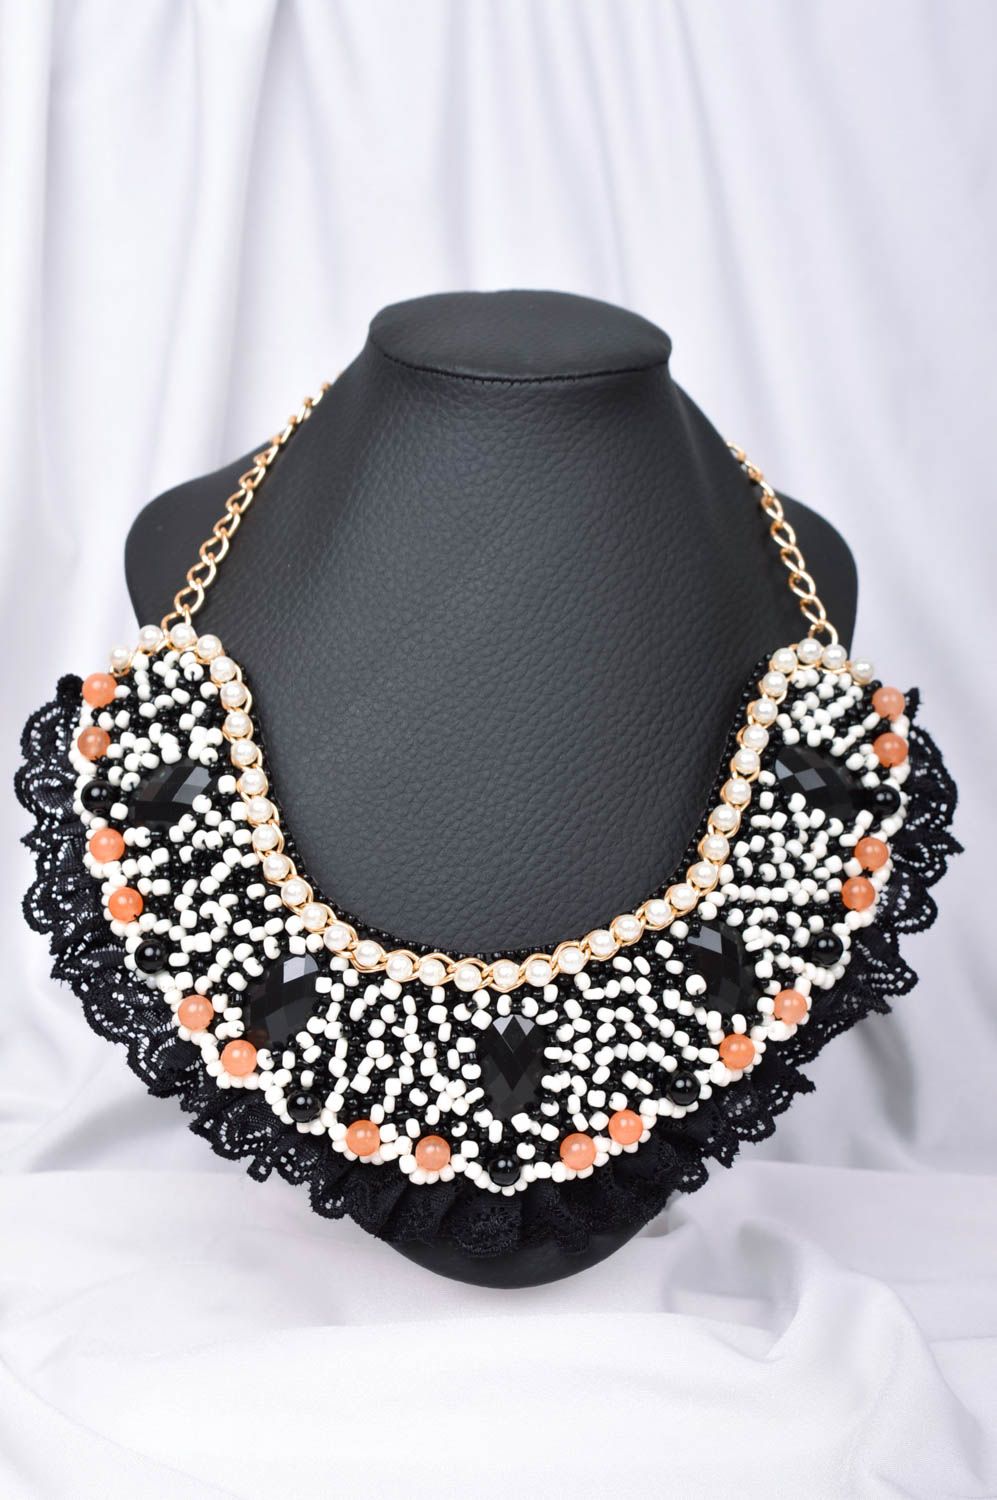 Beautiful handmade beaded necklace neck accessories for girls fashion trends photo 2